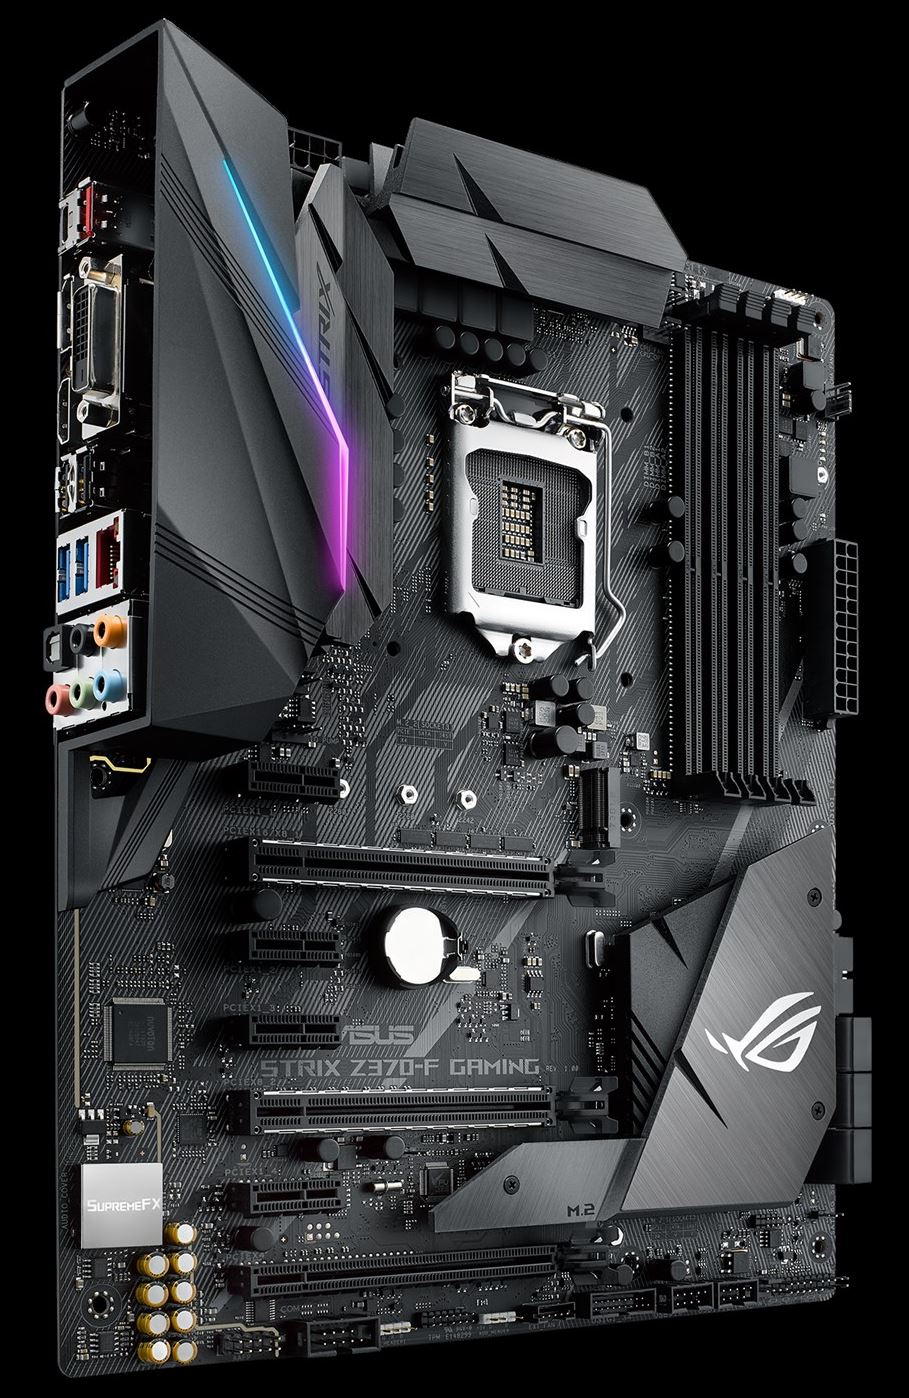 Final Words and Conclusion - The ASUS ROG Strix Z370-F Gaming